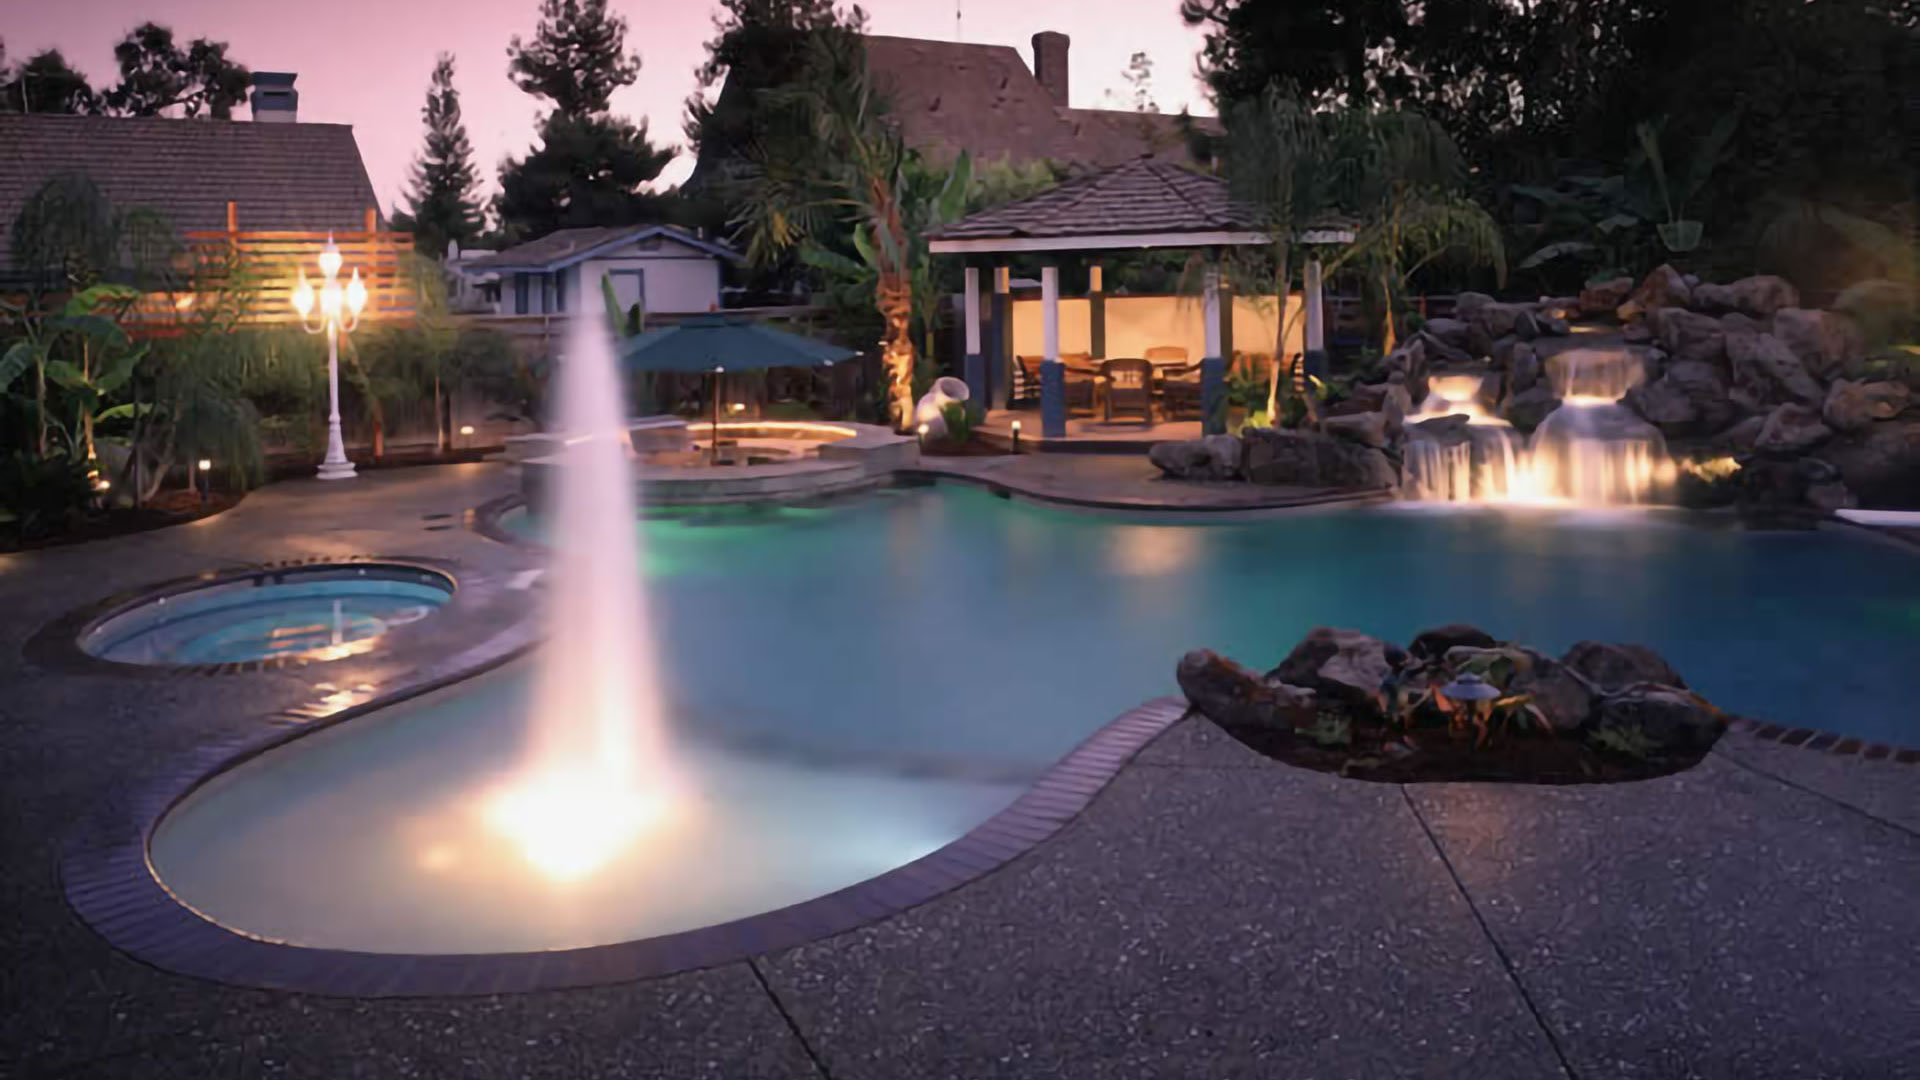 View our Award Winning Pool Design gallery.